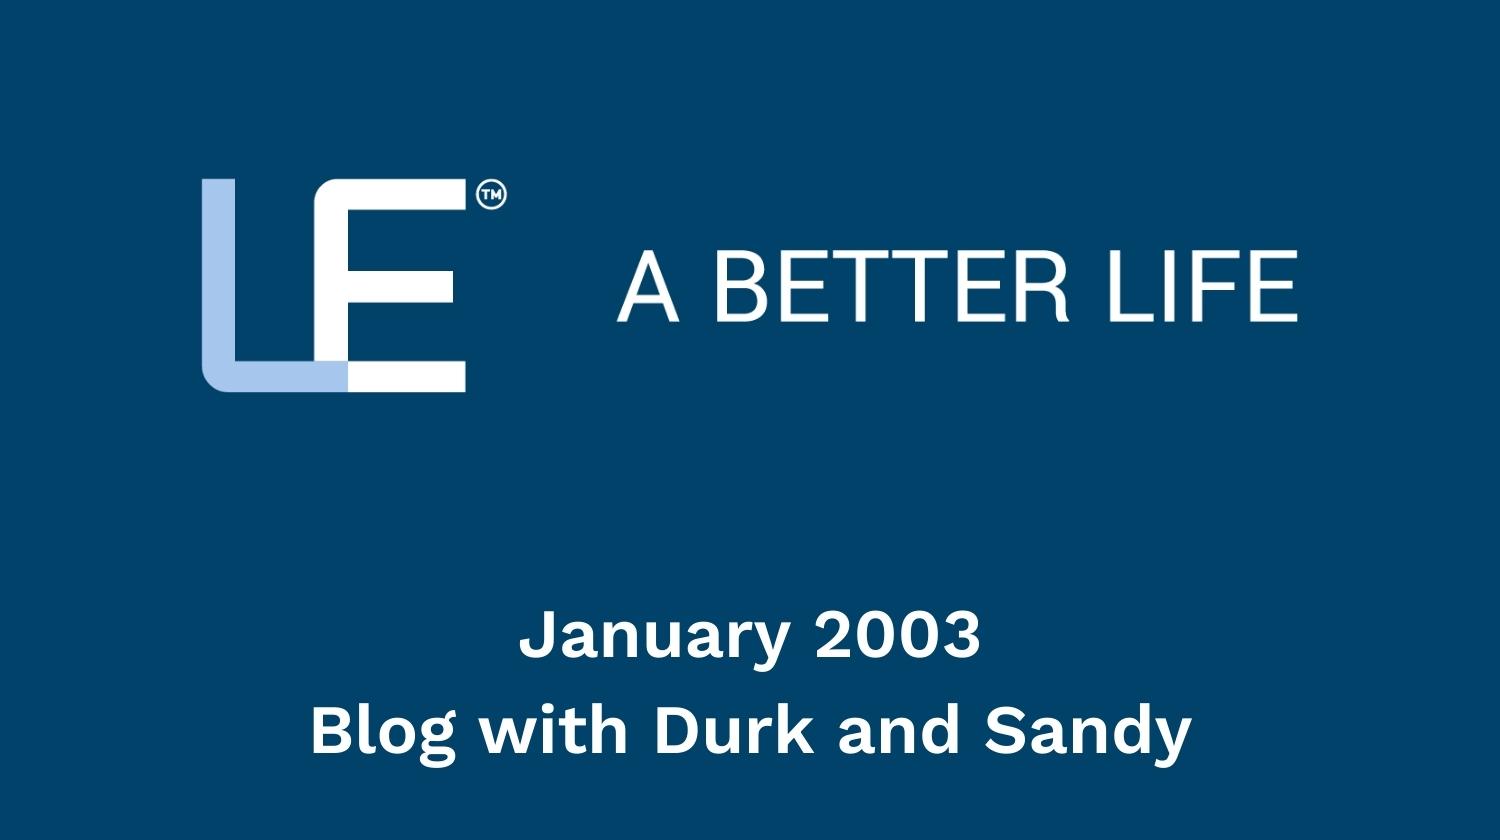 January 2003 Blog with Durk and Sandy